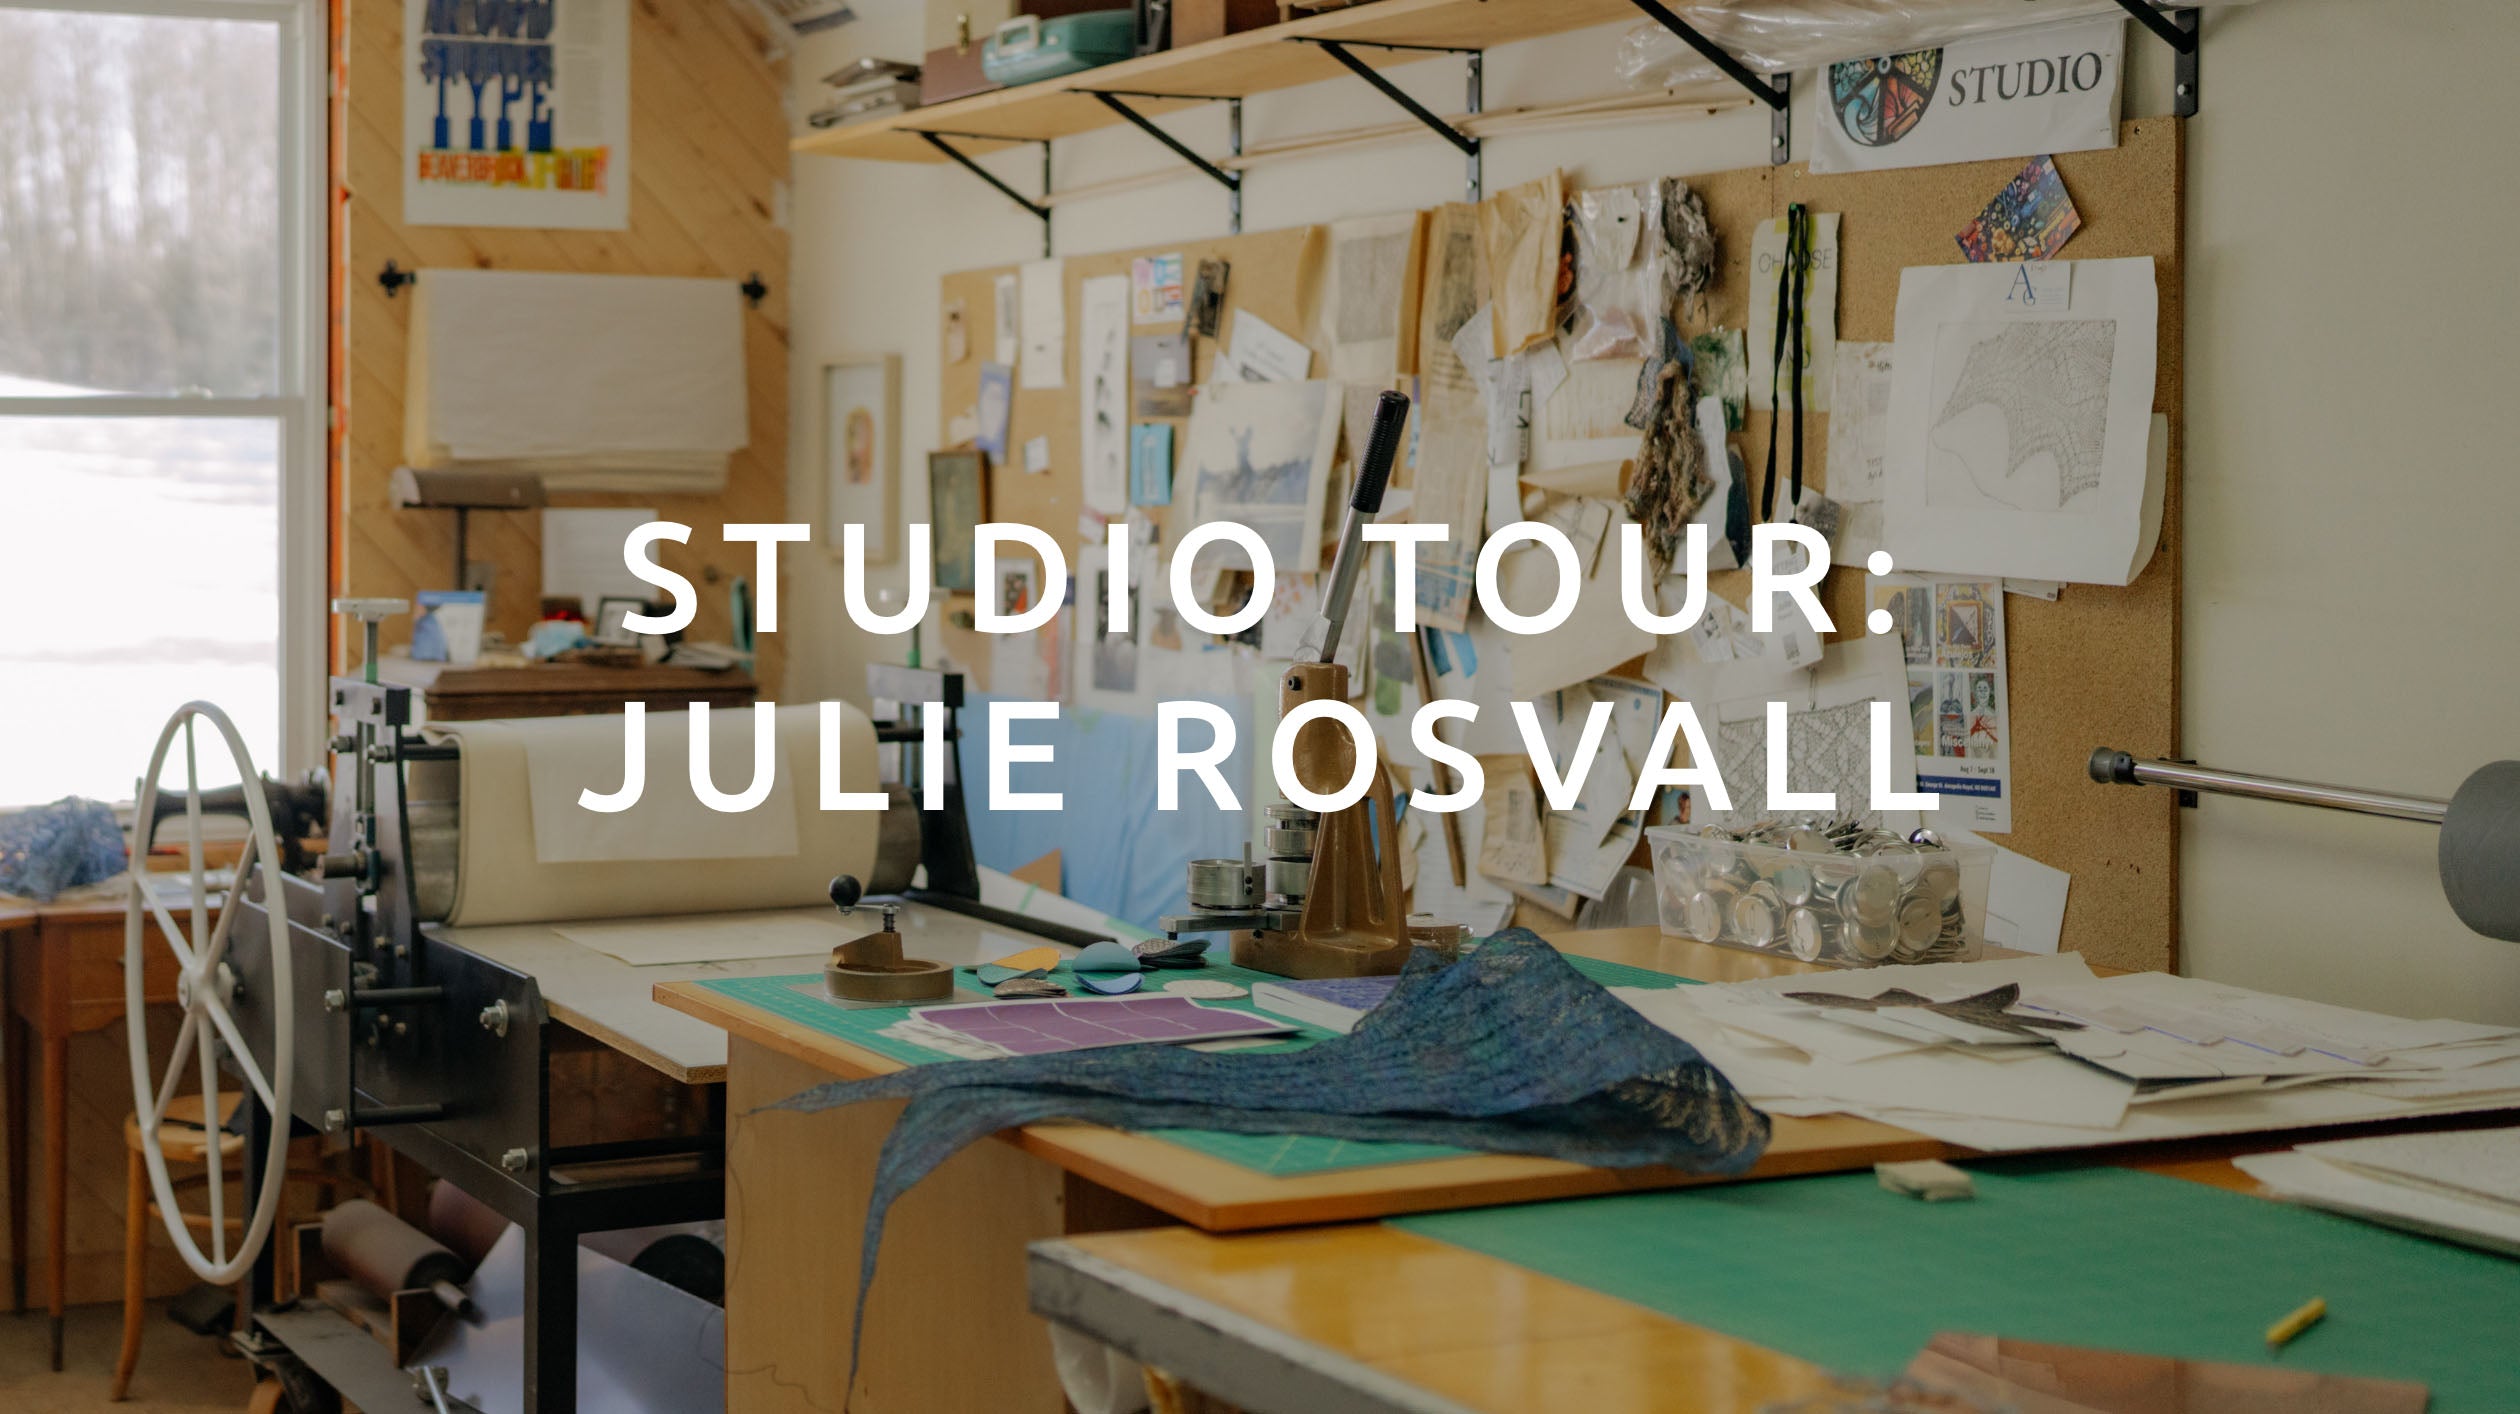 Load video: Studio Tour of Julie Rosvall